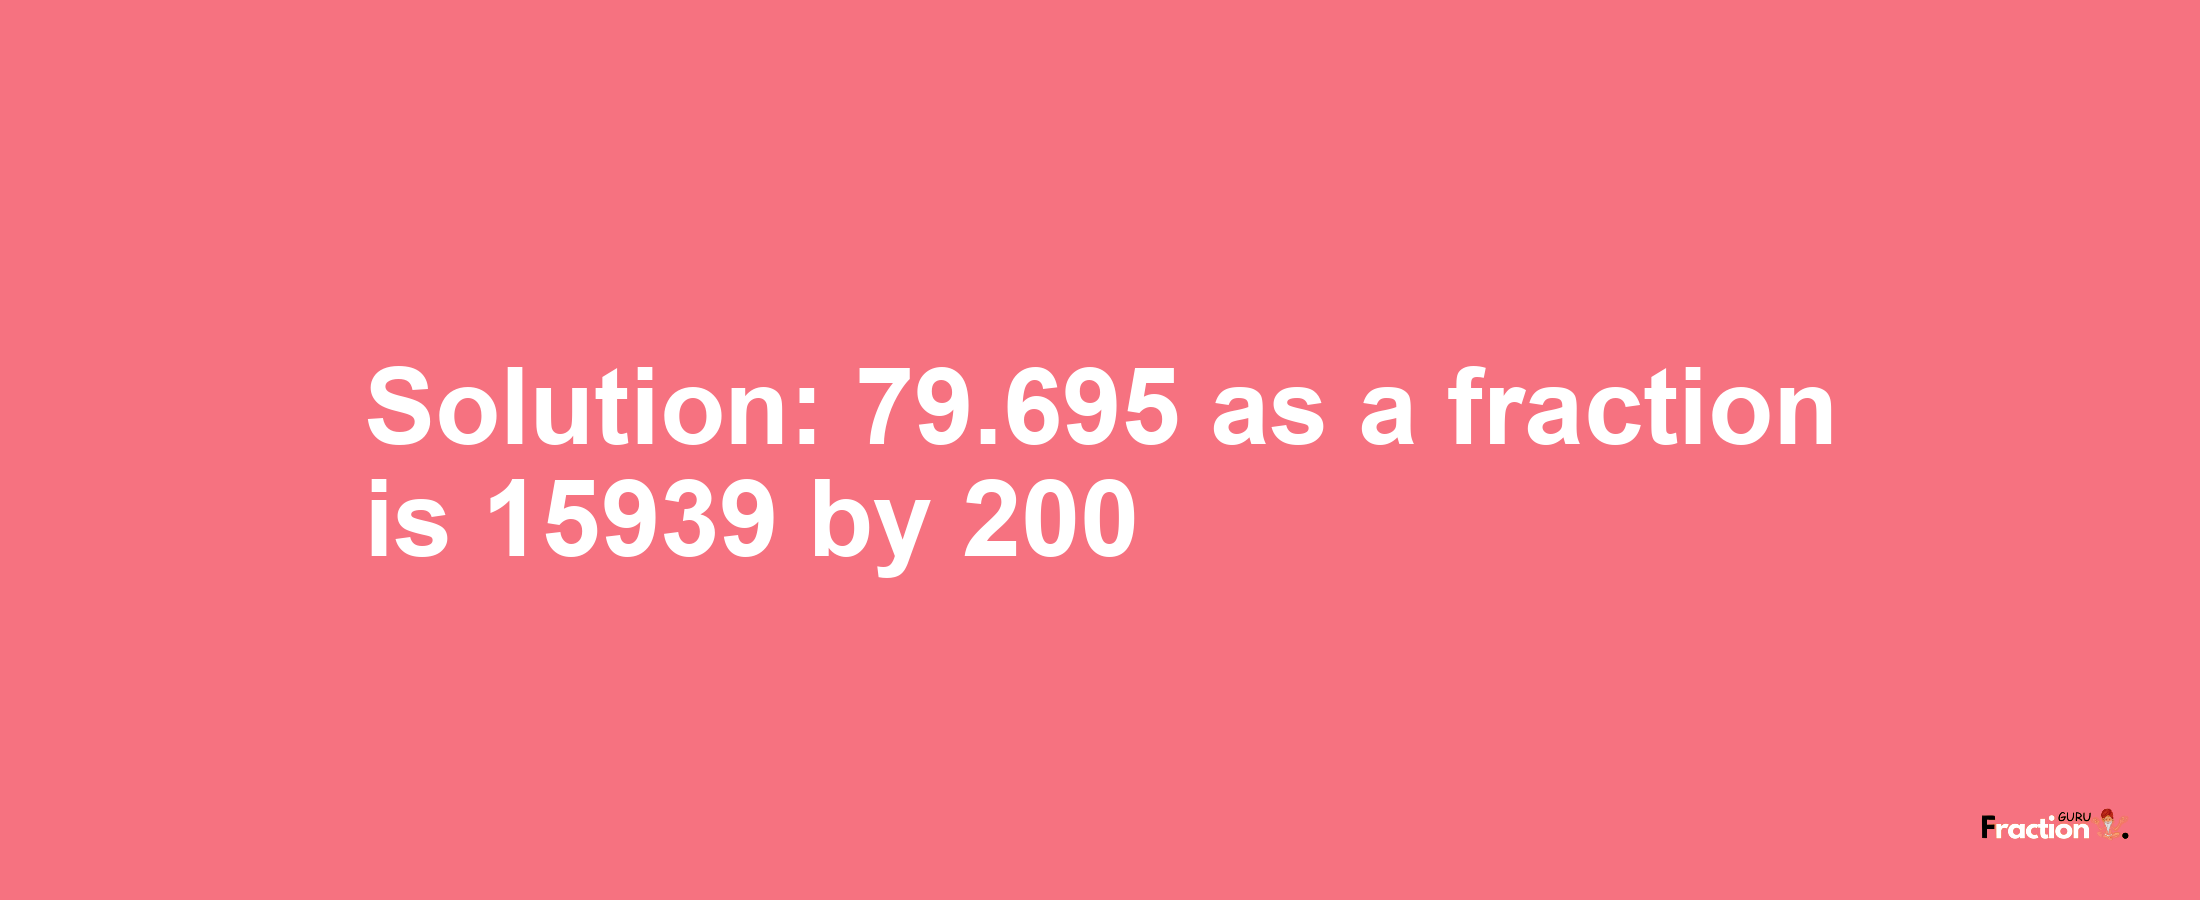 Solution:79.695 as a fraction is 15939/200